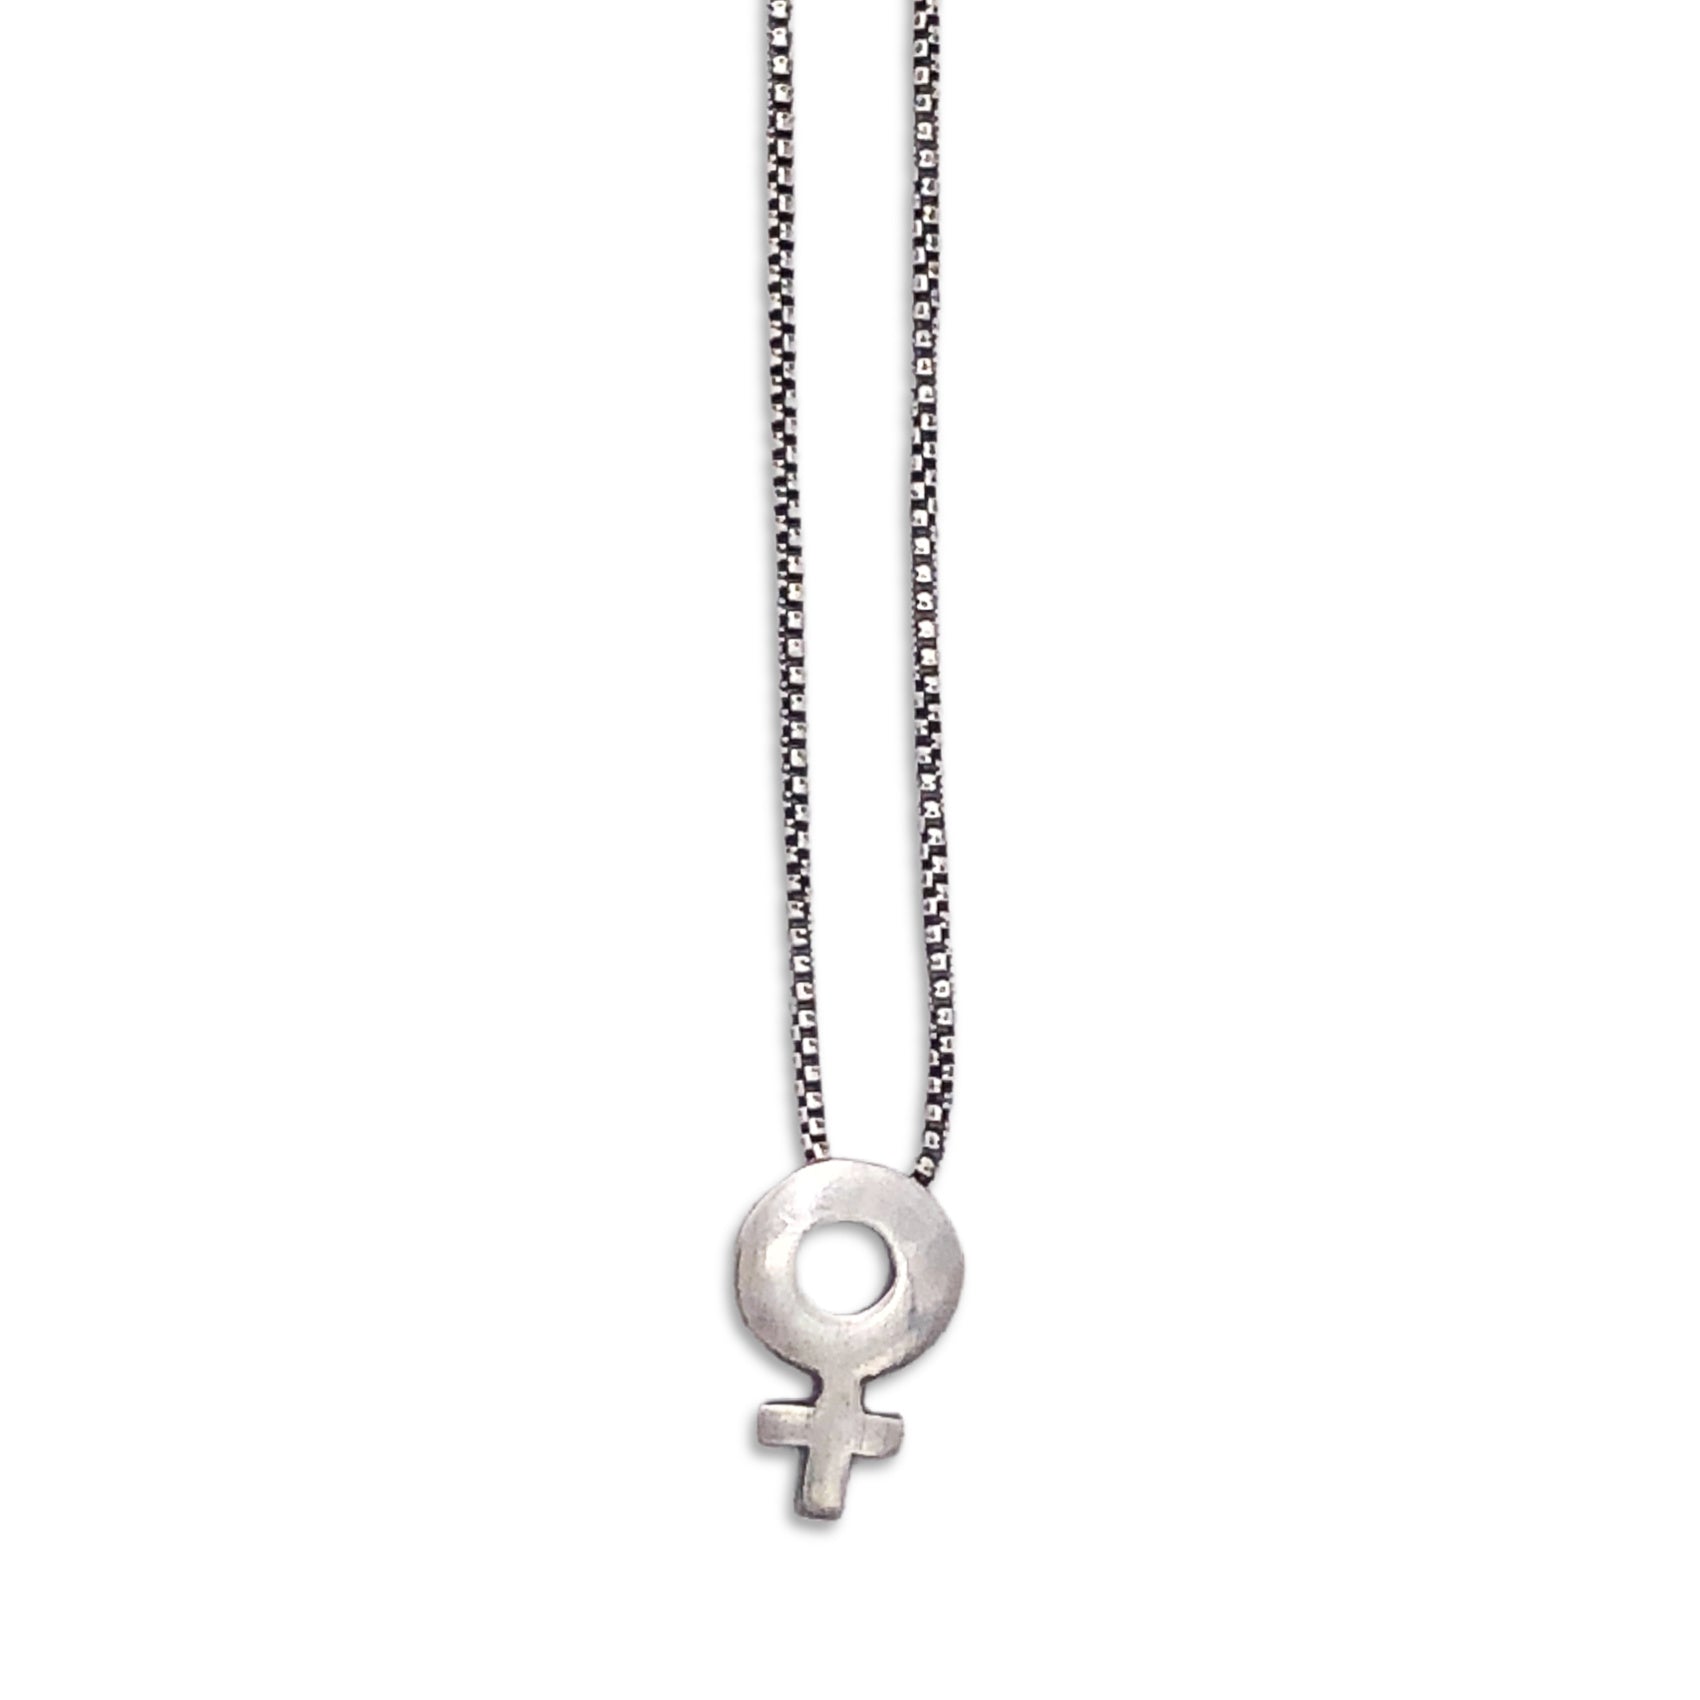 Female Charm Necklace